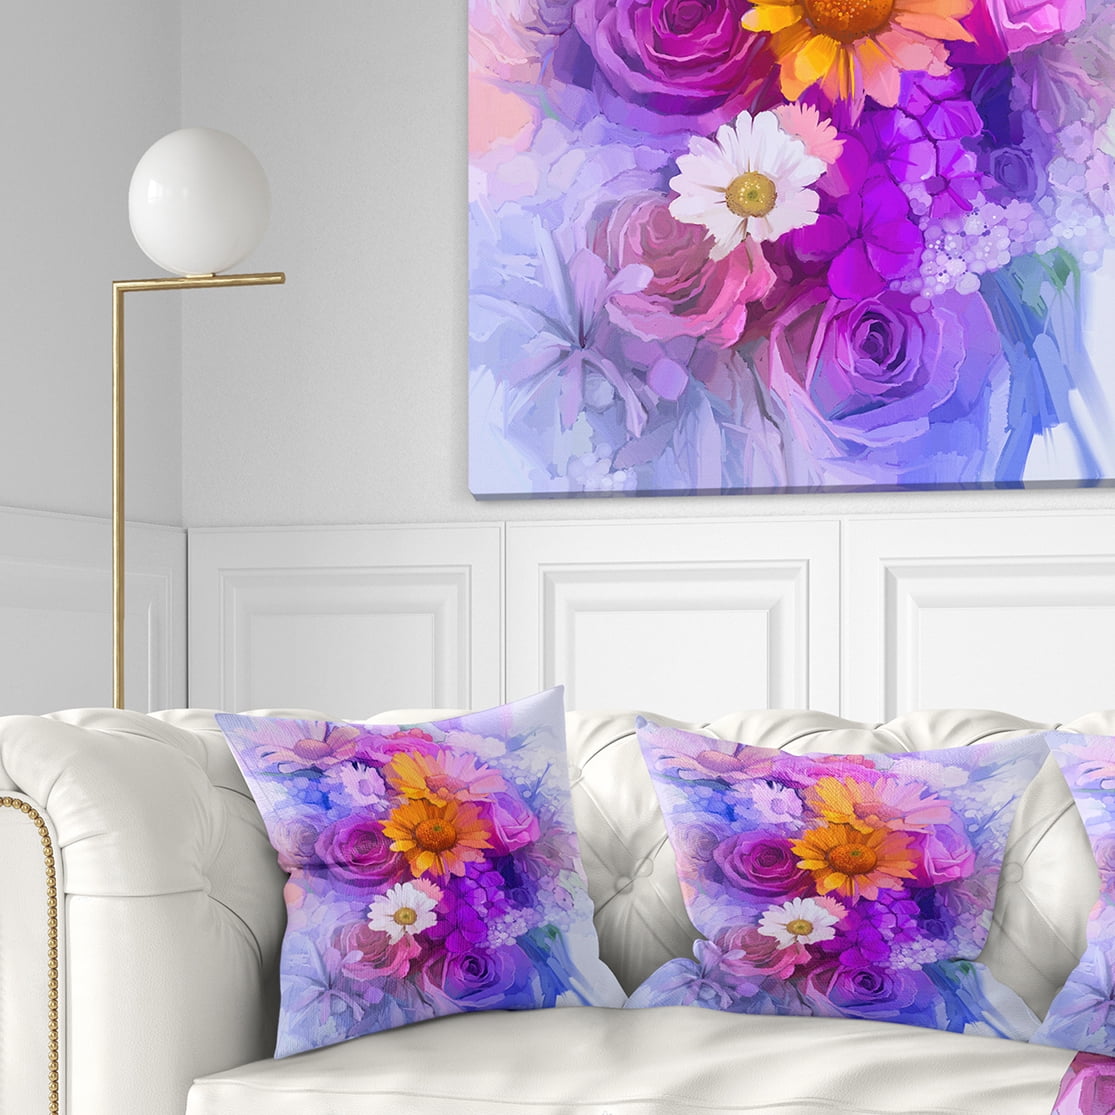 Insert Printed On Both Side Sofa Throw Pillow 16 in x 16 in Designart CU14128-16-16 Rose Daisy and Gerbera Flowers Floral Cushion Cover for Living Room in 